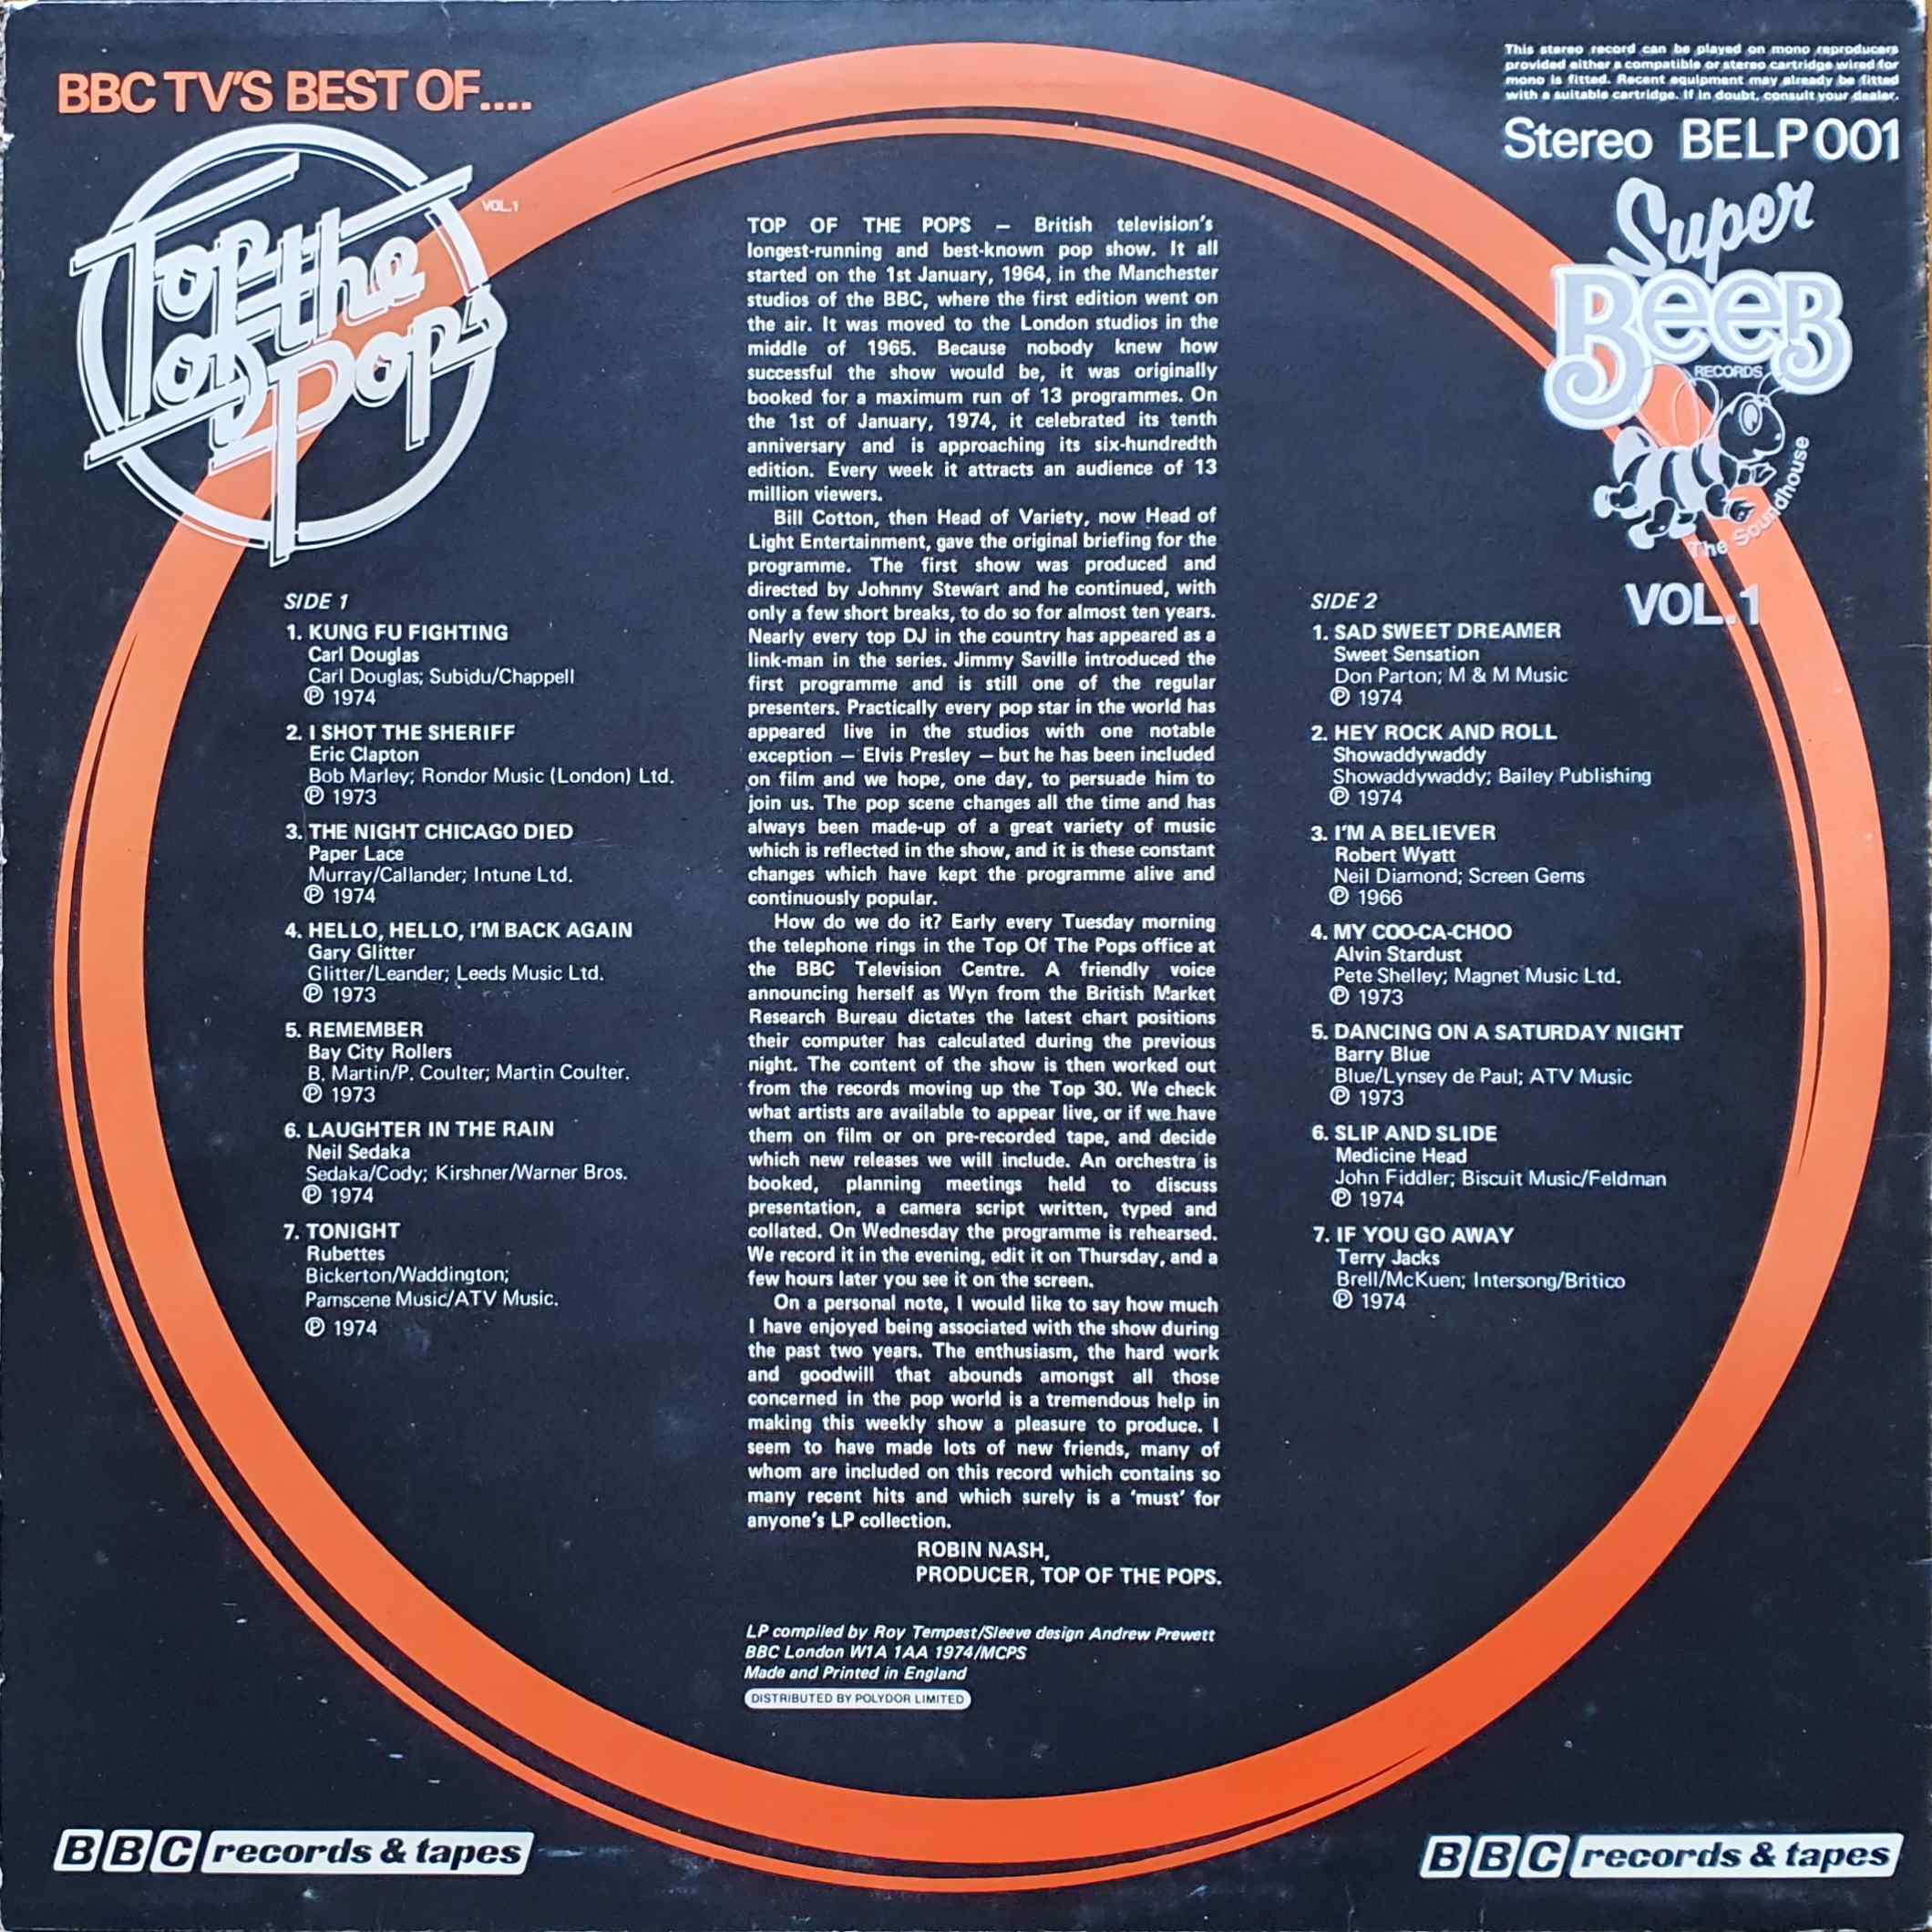 Picture of BELP 001 Best of top of the pops by artist Various from the BBC records and Tapes library